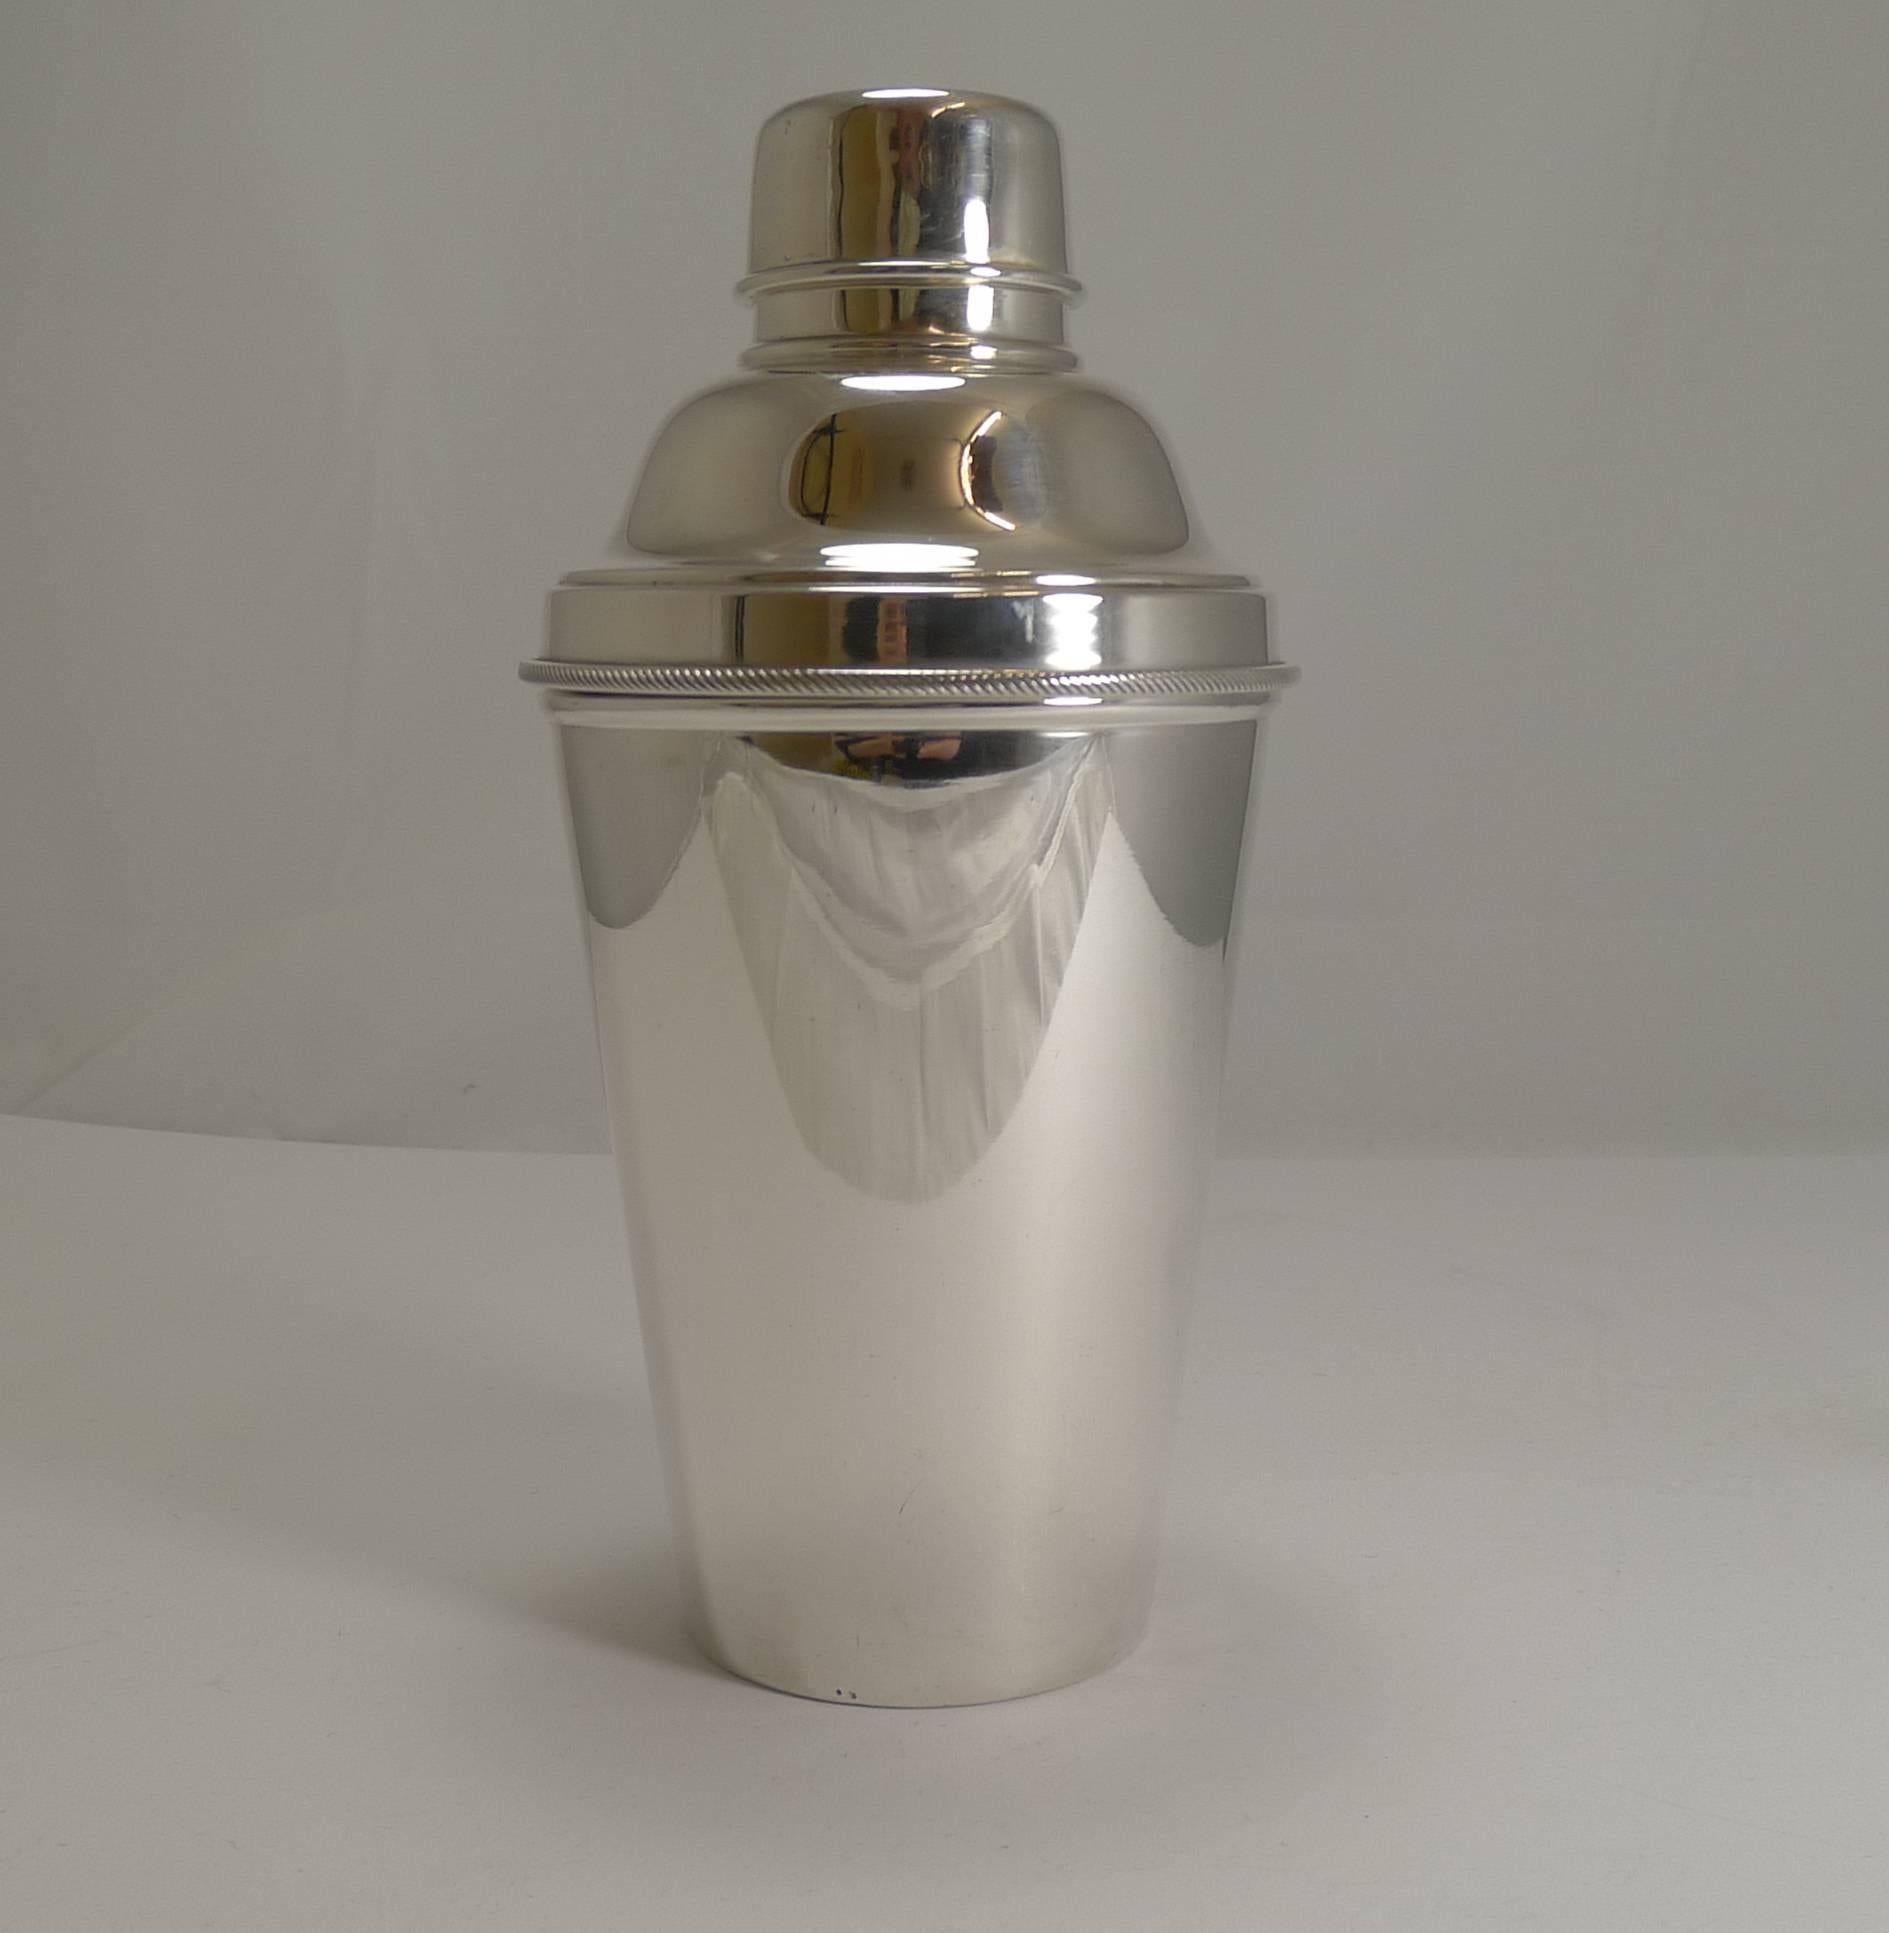 A wonderful and most unusual cocktail shaker without a makers mark, signed by the well renowned silversmith, James Dixon and Sons, the underside marked EP for Electro-Plated Nickel Silver and also marked Made In England. It is the most desirable